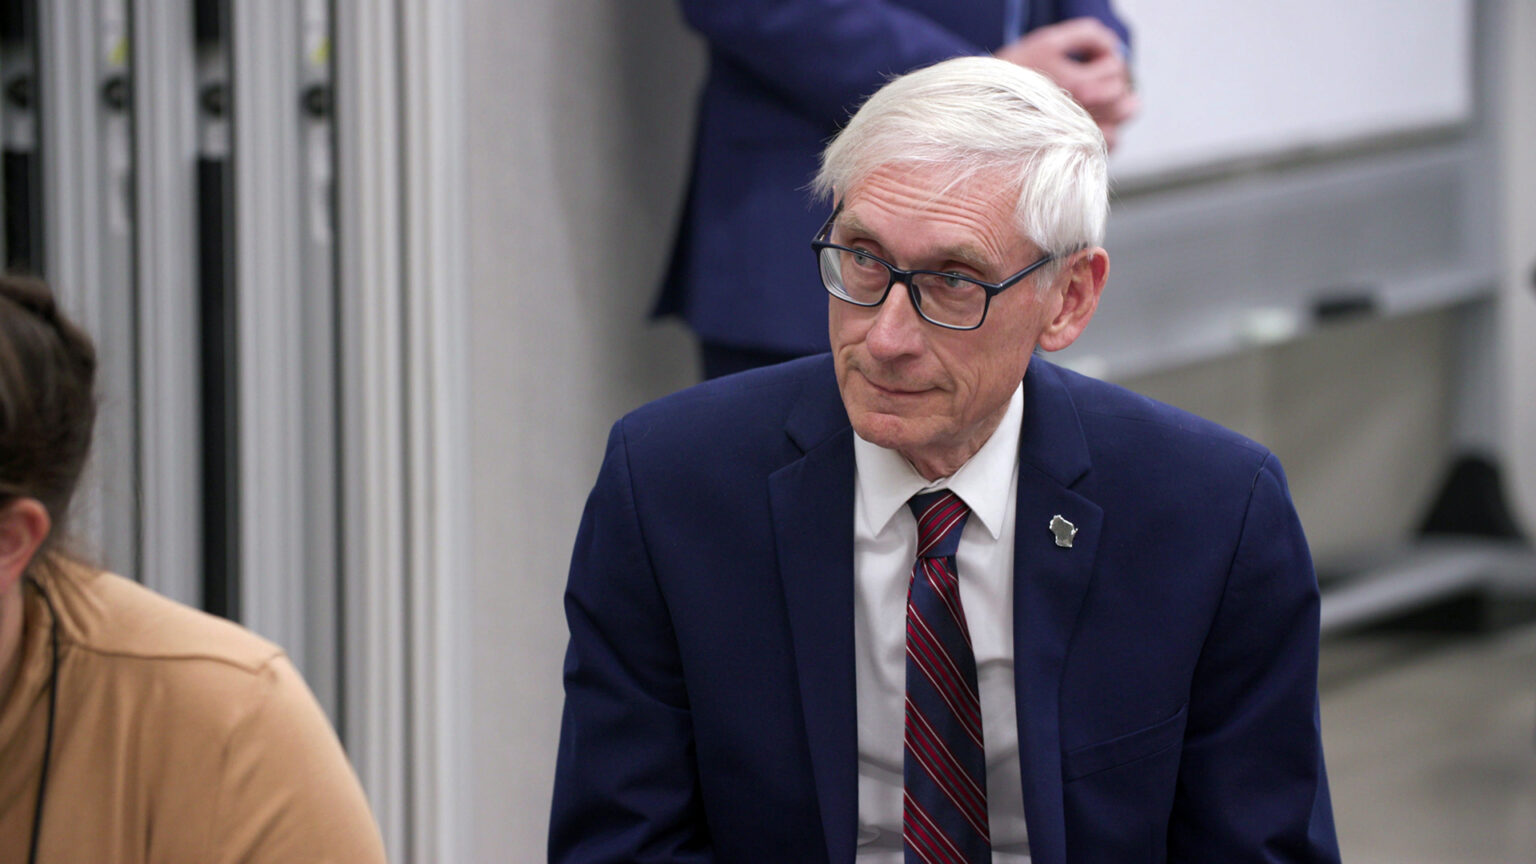 Tony Evers sits and listens in a room with other people siting and standing in the foreground and background.